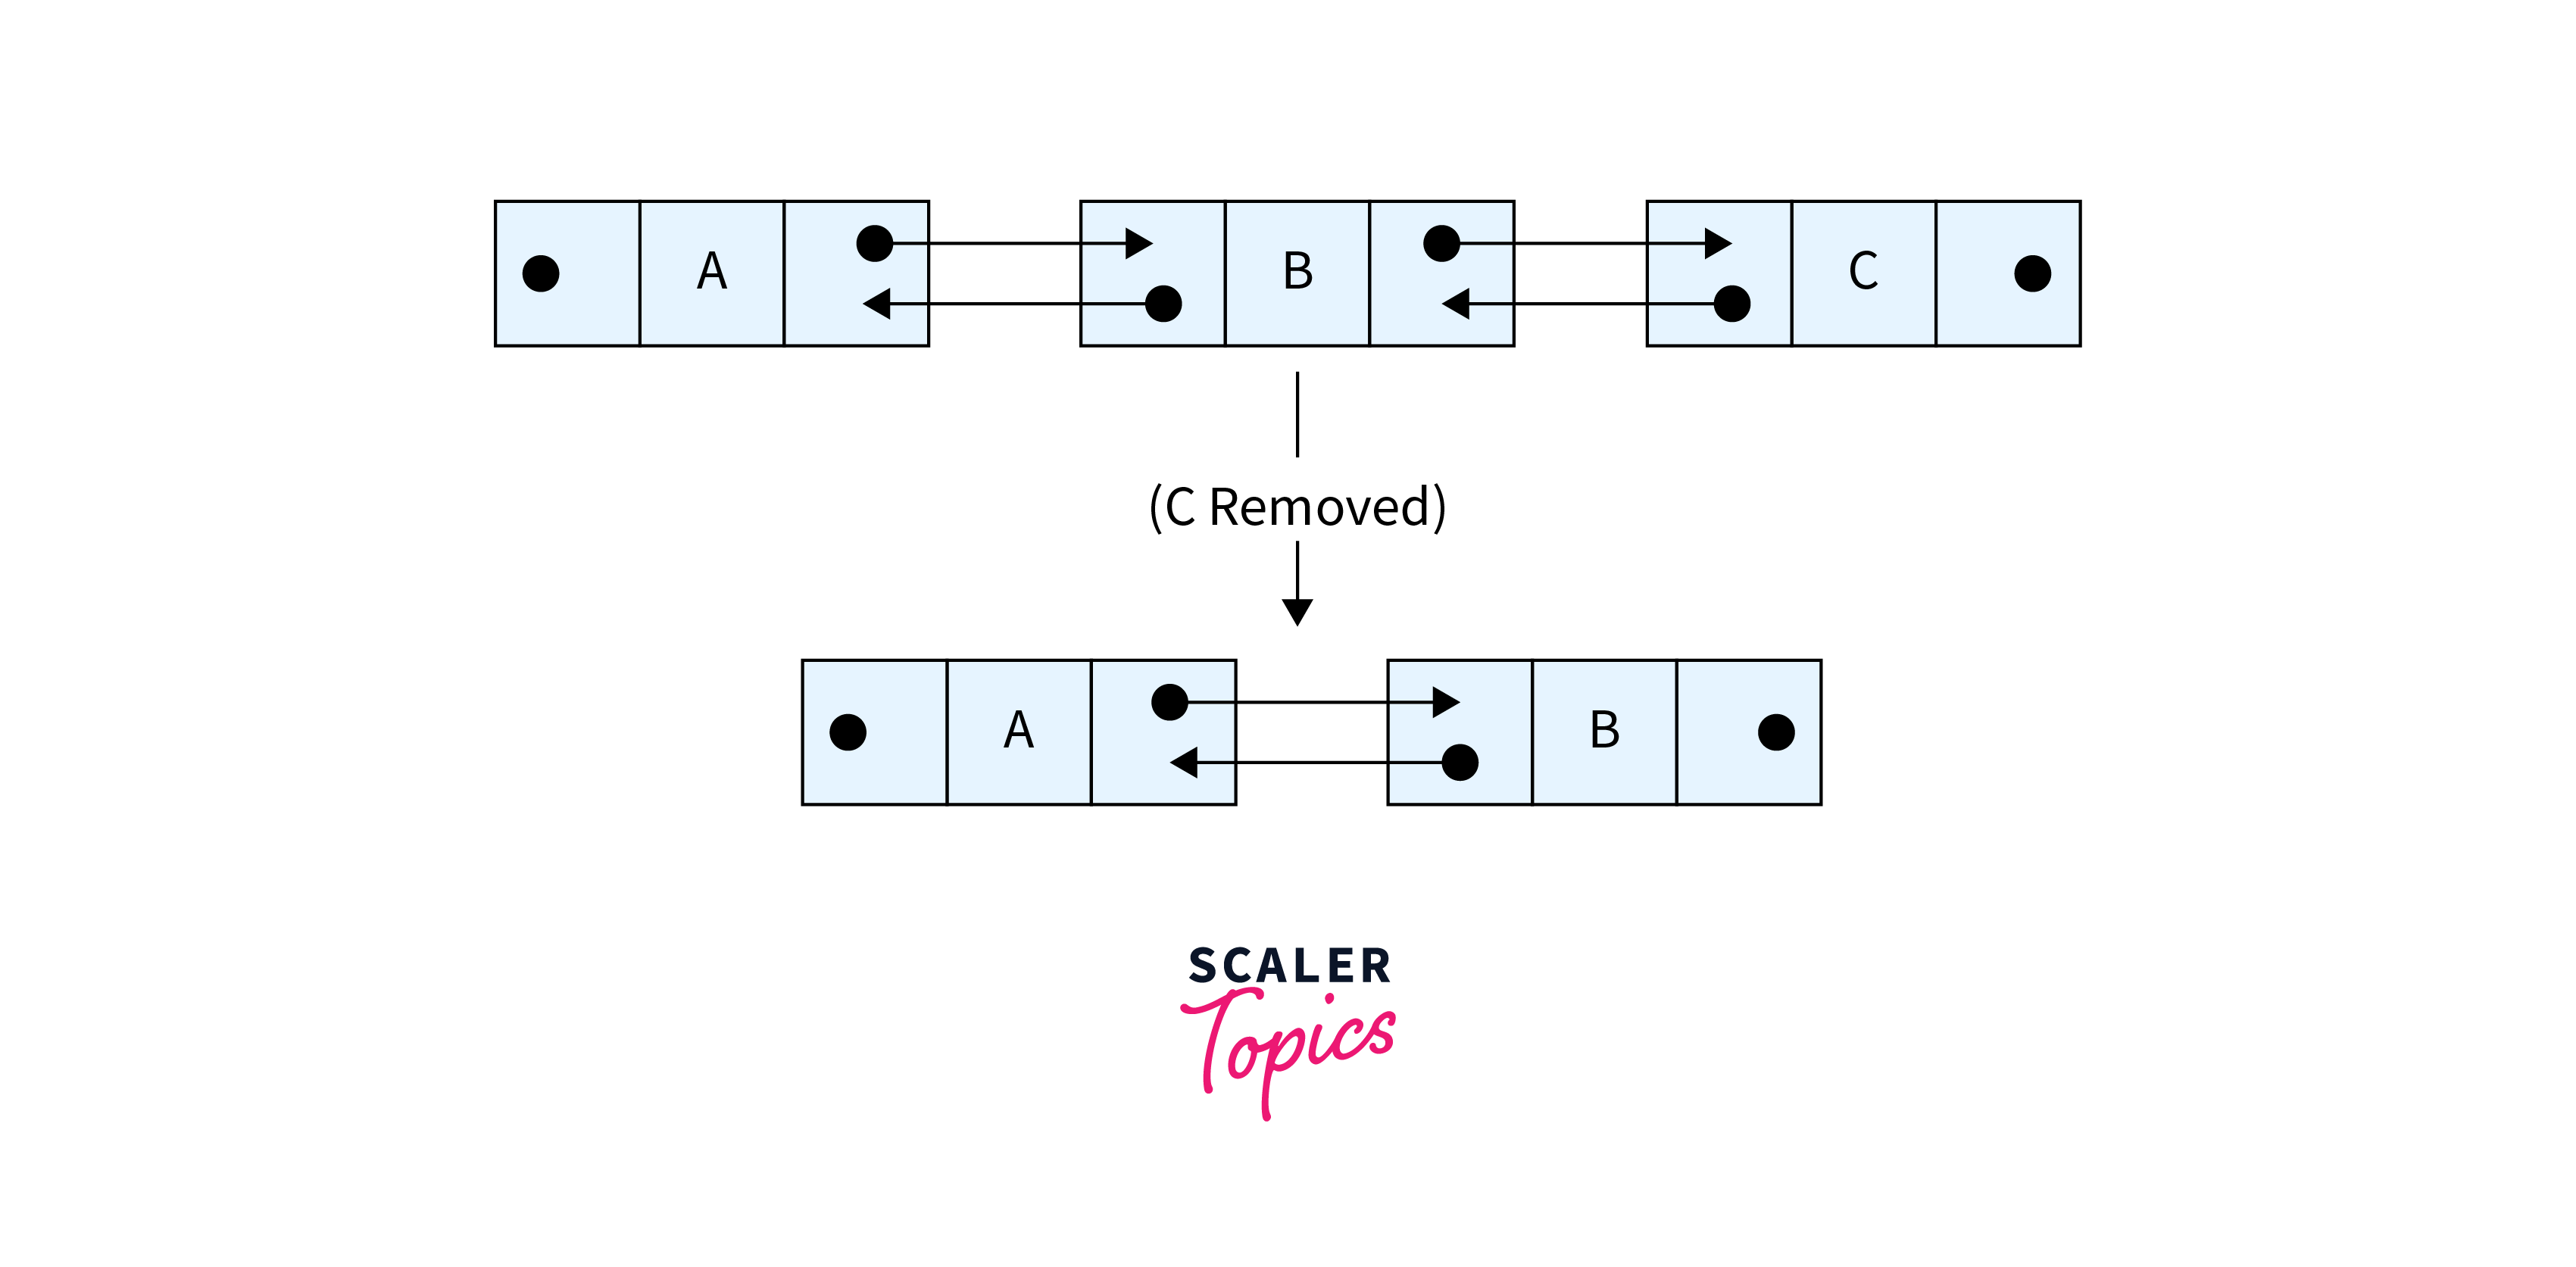 Deletion at the End in Linked List